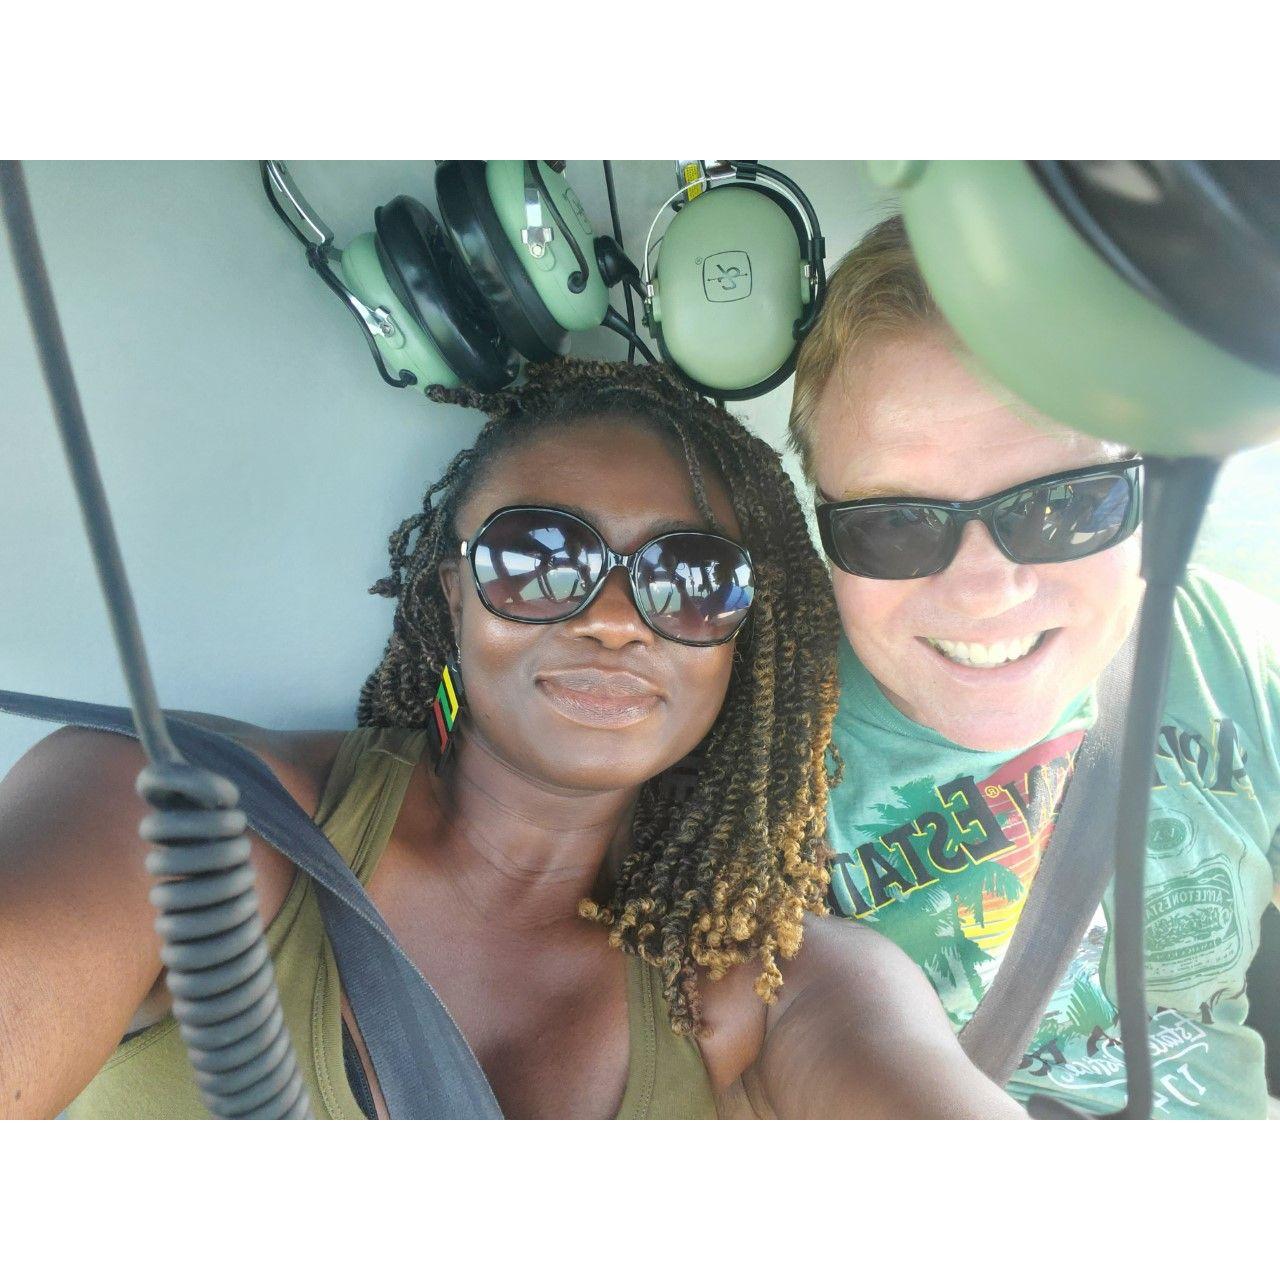 Helicopter ride on our first trip together in Myrtle Beach, South Carolina.